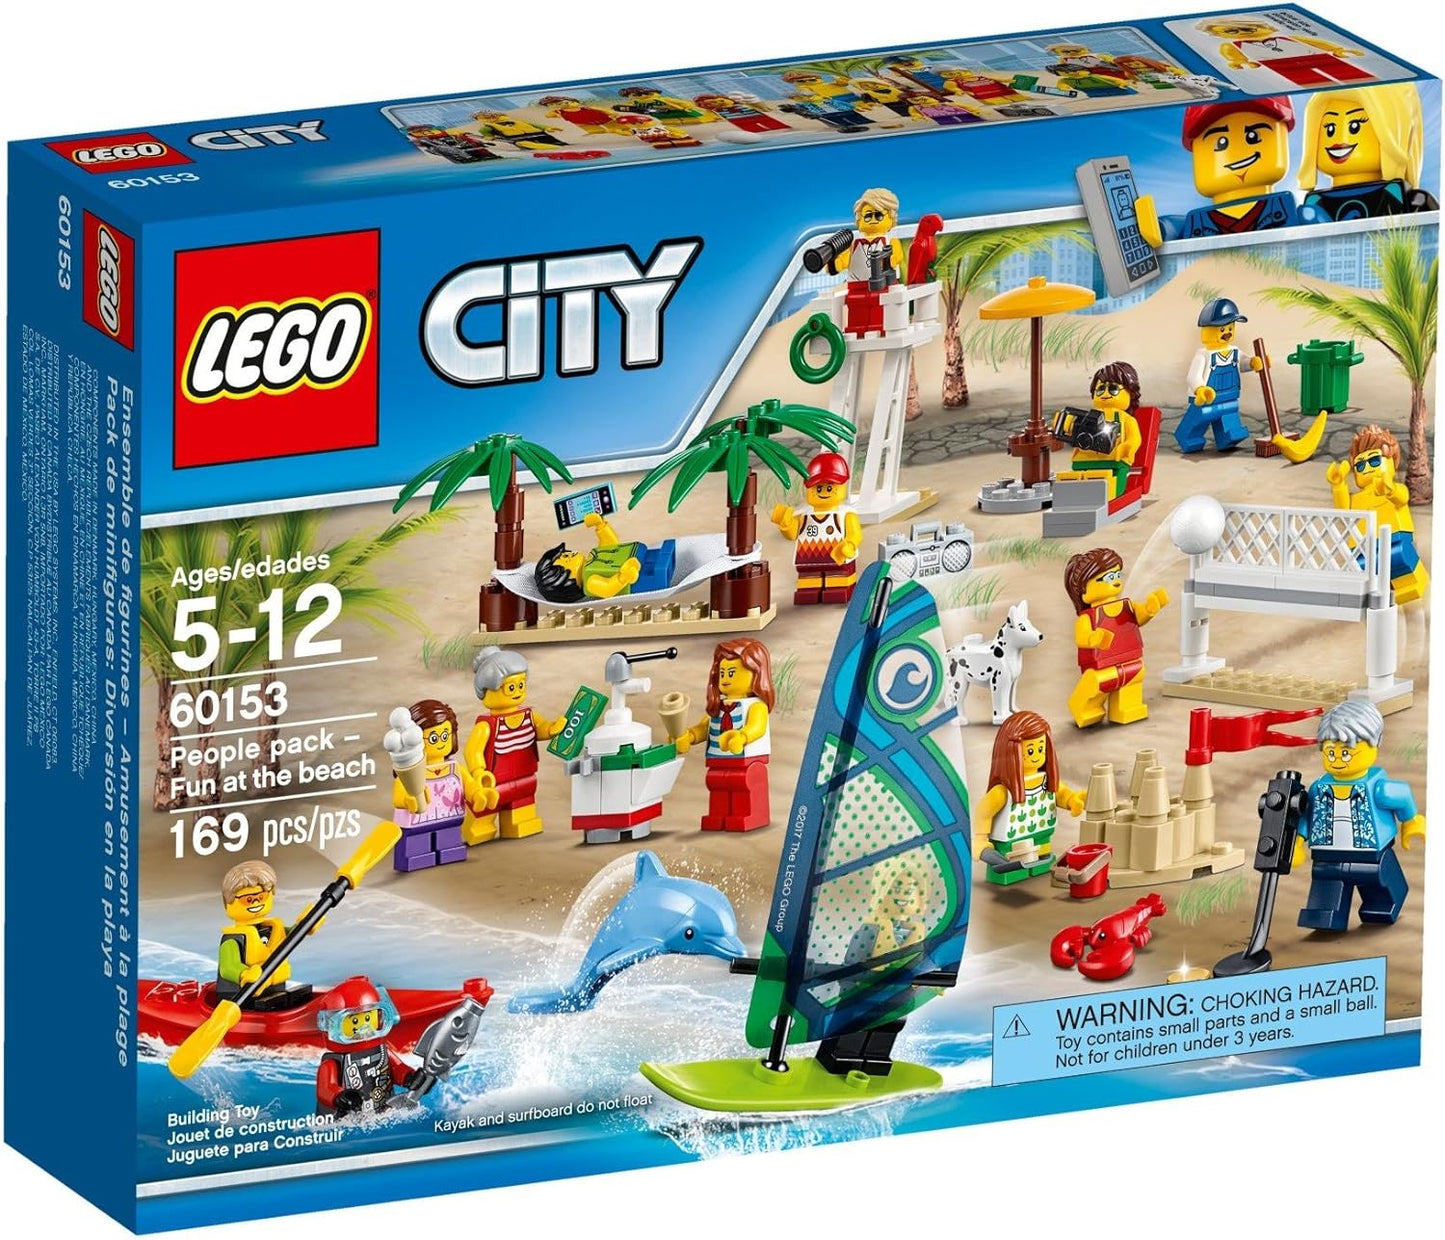 LEGO City People Pack – Fun at The Beach 60153